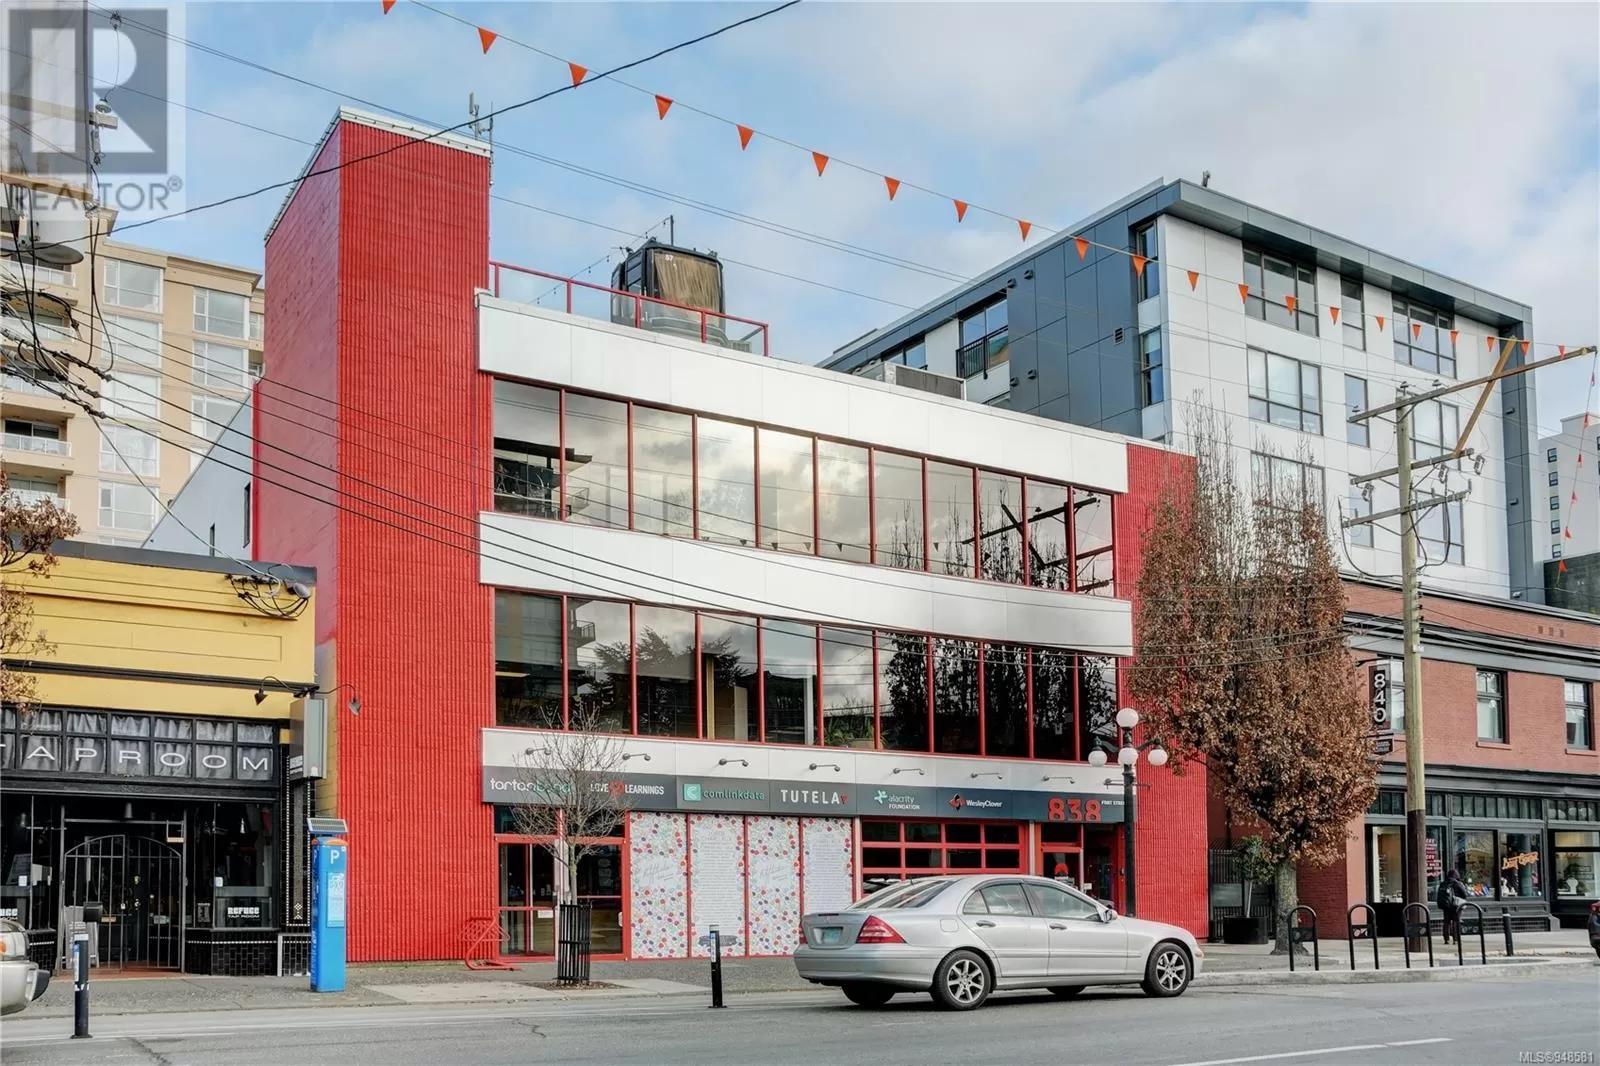 Commercial Mix for rent: 100 838 Fort St, Victoria, British Columbia V8W 1H8